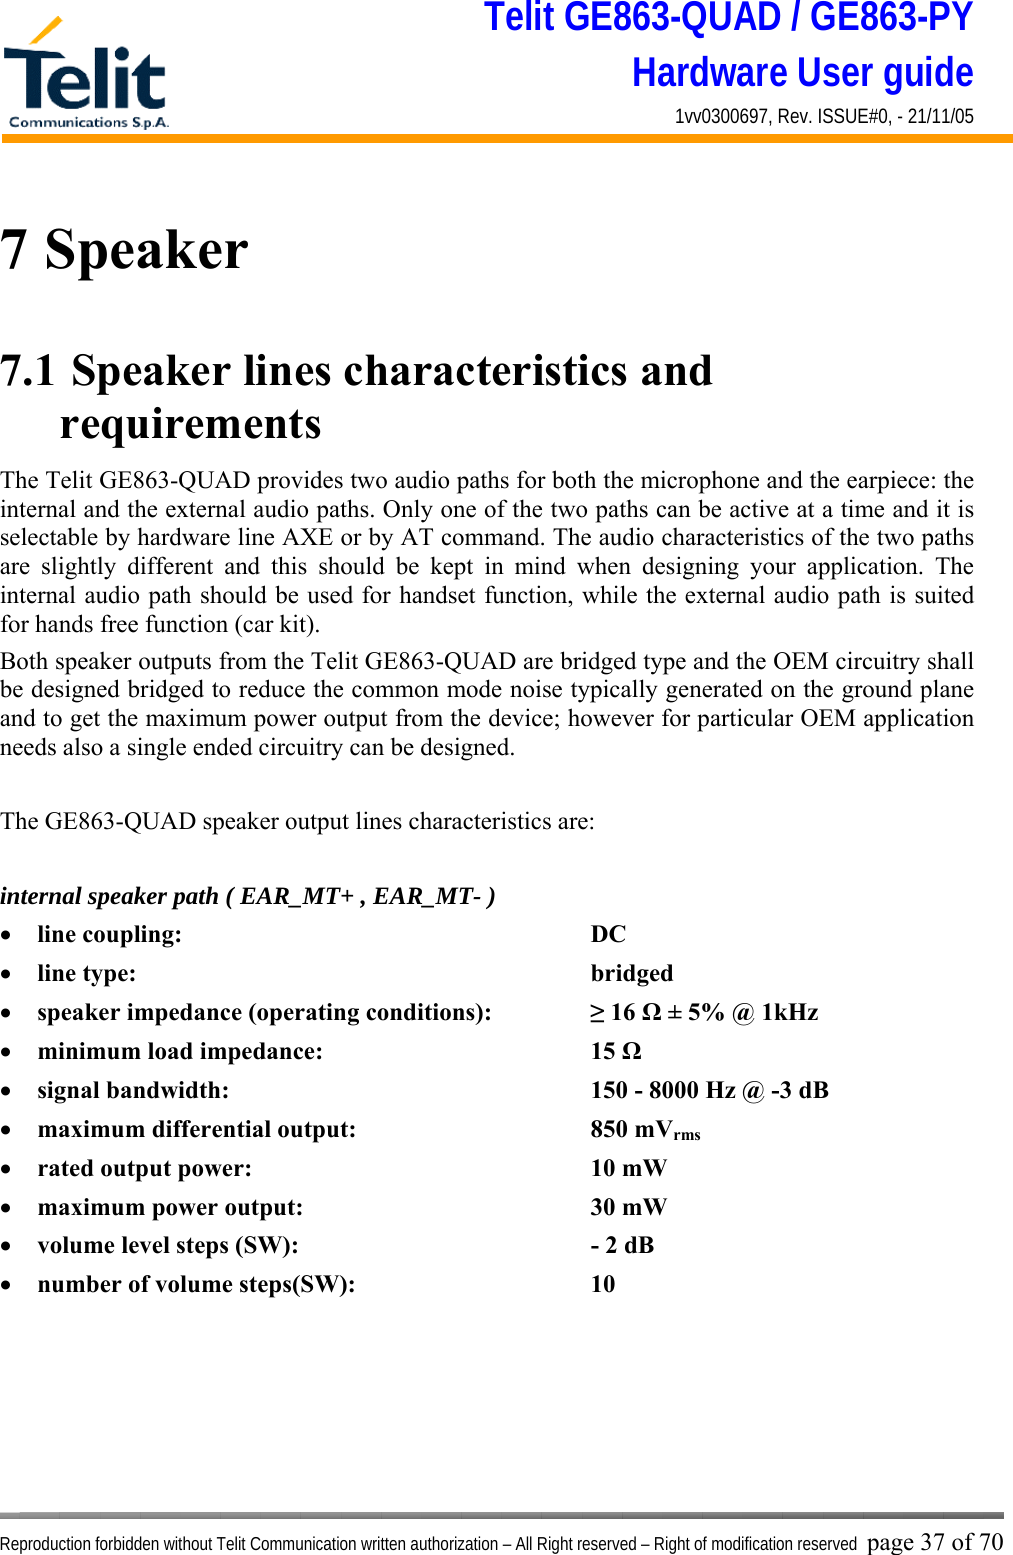 Telit GE863-QUAD / GE863-PY Hardware User guide 1vv0300697, Rev. ISSUE#0, - 21/11/05    Reproduction forbidden without Telit Communication written authorization – All Right reserved – Right of modification reserved page 37 of 70 7 Speaker 7.1  Speaker lines characteristics and requirements  The Telit GE863-QUAD provides two audio paths for both the microphone and the earpiece: the internal and the external audio paths. Only one of the two paths can be active at a time and it is selectable by hardware line AXE or by AT command. The audio characteristics of the two paths are slightly different and this should be kept in mind when designing your application. The internal audio path should be used for handset function, while the external audio path is suited for hands free function (car kit). Both speaker outputs from the Telit GE863-QUAD are bridged type and the OEM circuitry shall be designed bridged to reduce the common mode noise typically generated on the ground plane and to get the maximum power output from the device; however for particular OEM application needs also a single ended circuitry can be designed.  The GE863-QUAD speaker output lines characteristics are:  internal speaker path ( EAR_MT+ , EAR_MT- ) •  line coupling:      DC  •  line type:       bridged •  speaker impedance (operating conditions):    ≥ 16 Ω ± 5% @ 1kHz •  minimum load impedance:    15 Ω •  signal bandwidth:          150 - 8000 Hz @ -3 dB  •  maximum differential output:    850 mVrms •  rated output power:     10 mW •  maximum power output:    30 mW •  volume level steps (SW):        - 2 dB •  number of volume steps(SW):    10       